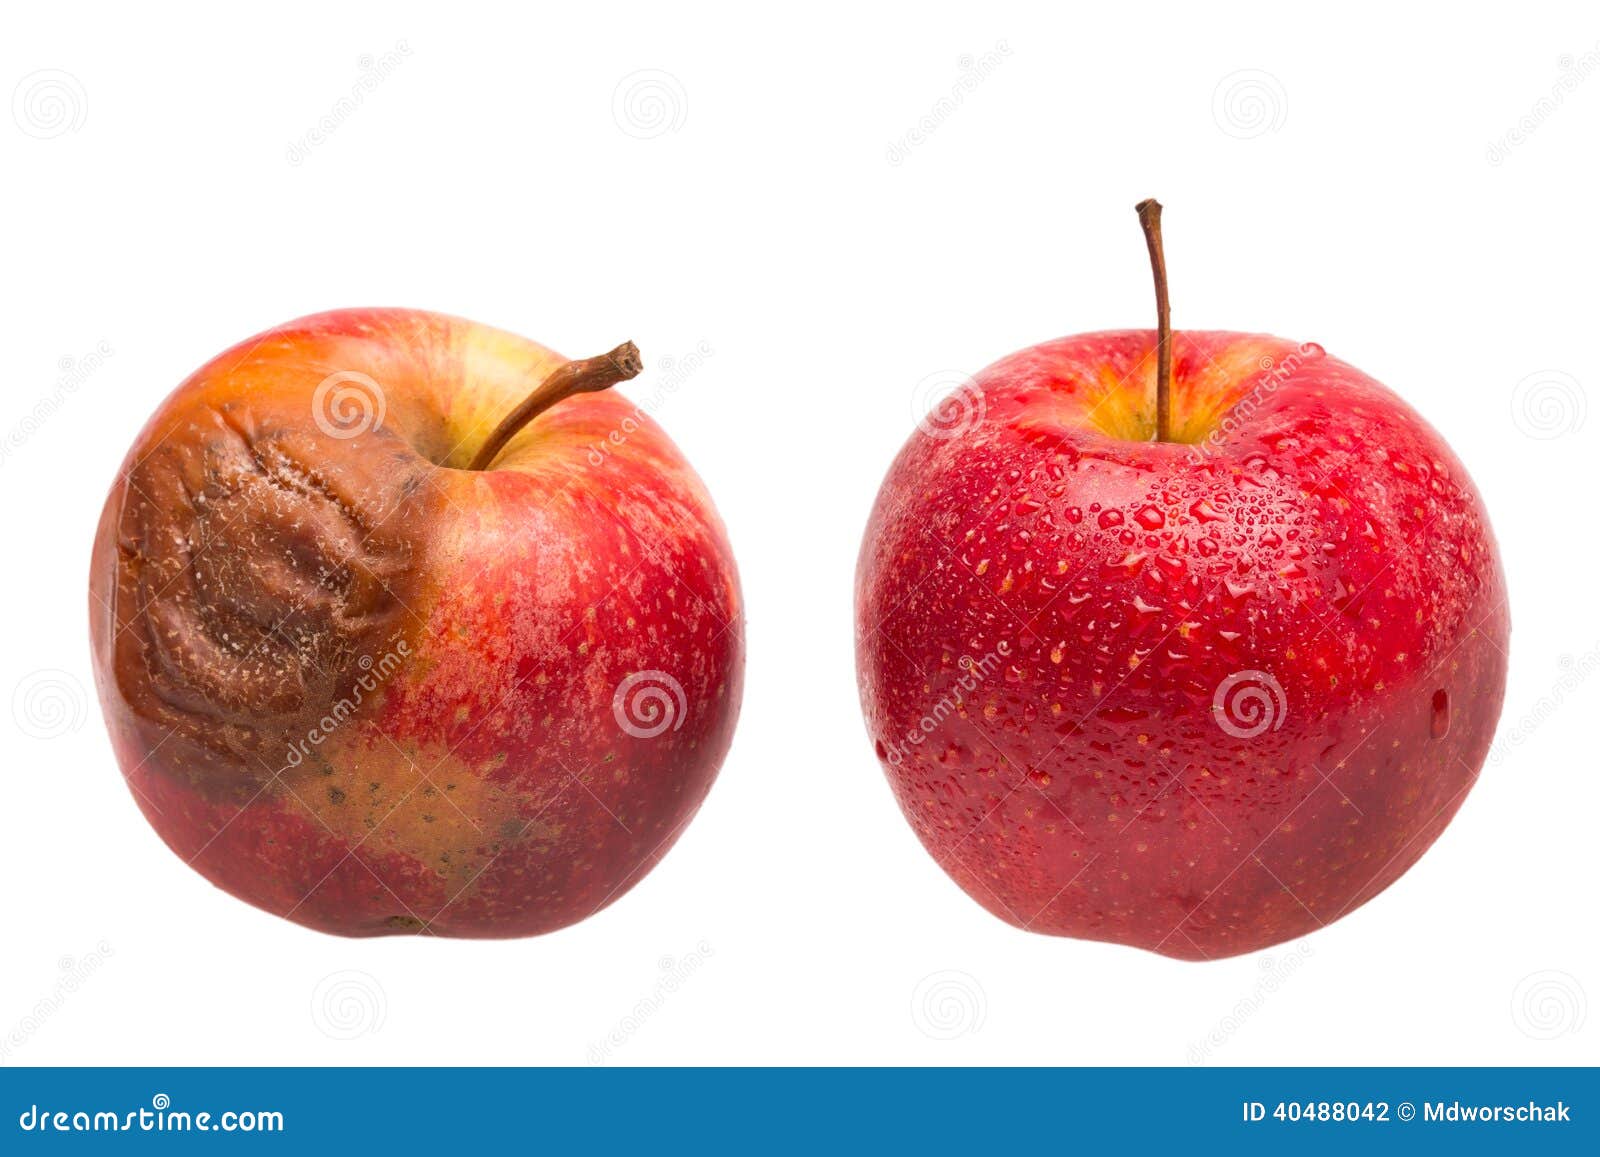 dozy red apple as comparison to fresh red apple